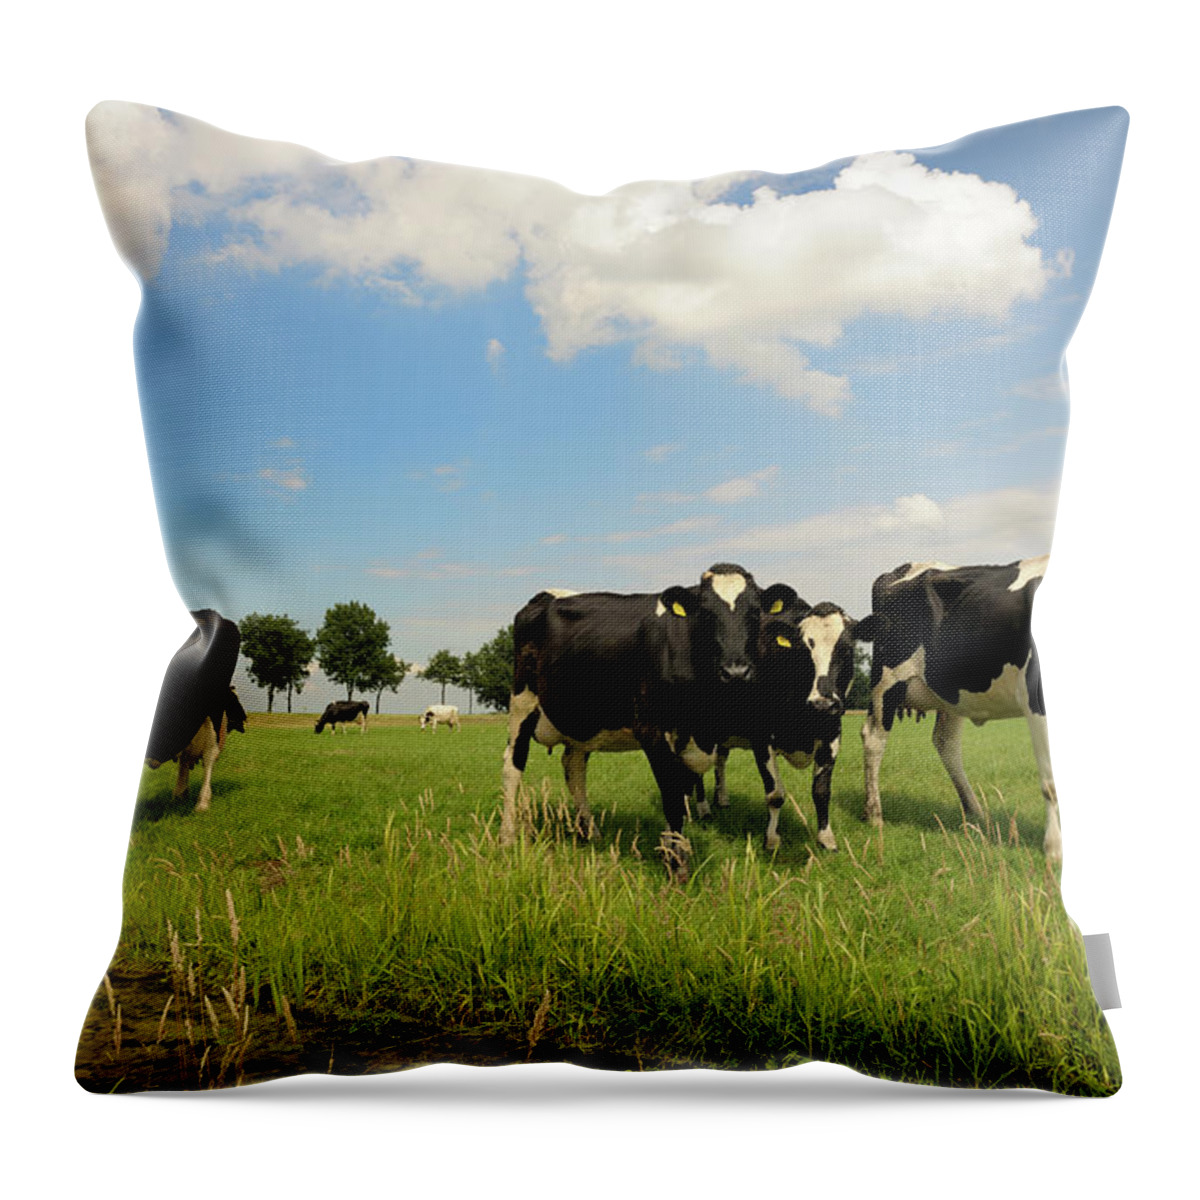 Domestic Animals Throw Pillow featuring the photograph Dairy Cattle In Meadow by Pidjoe